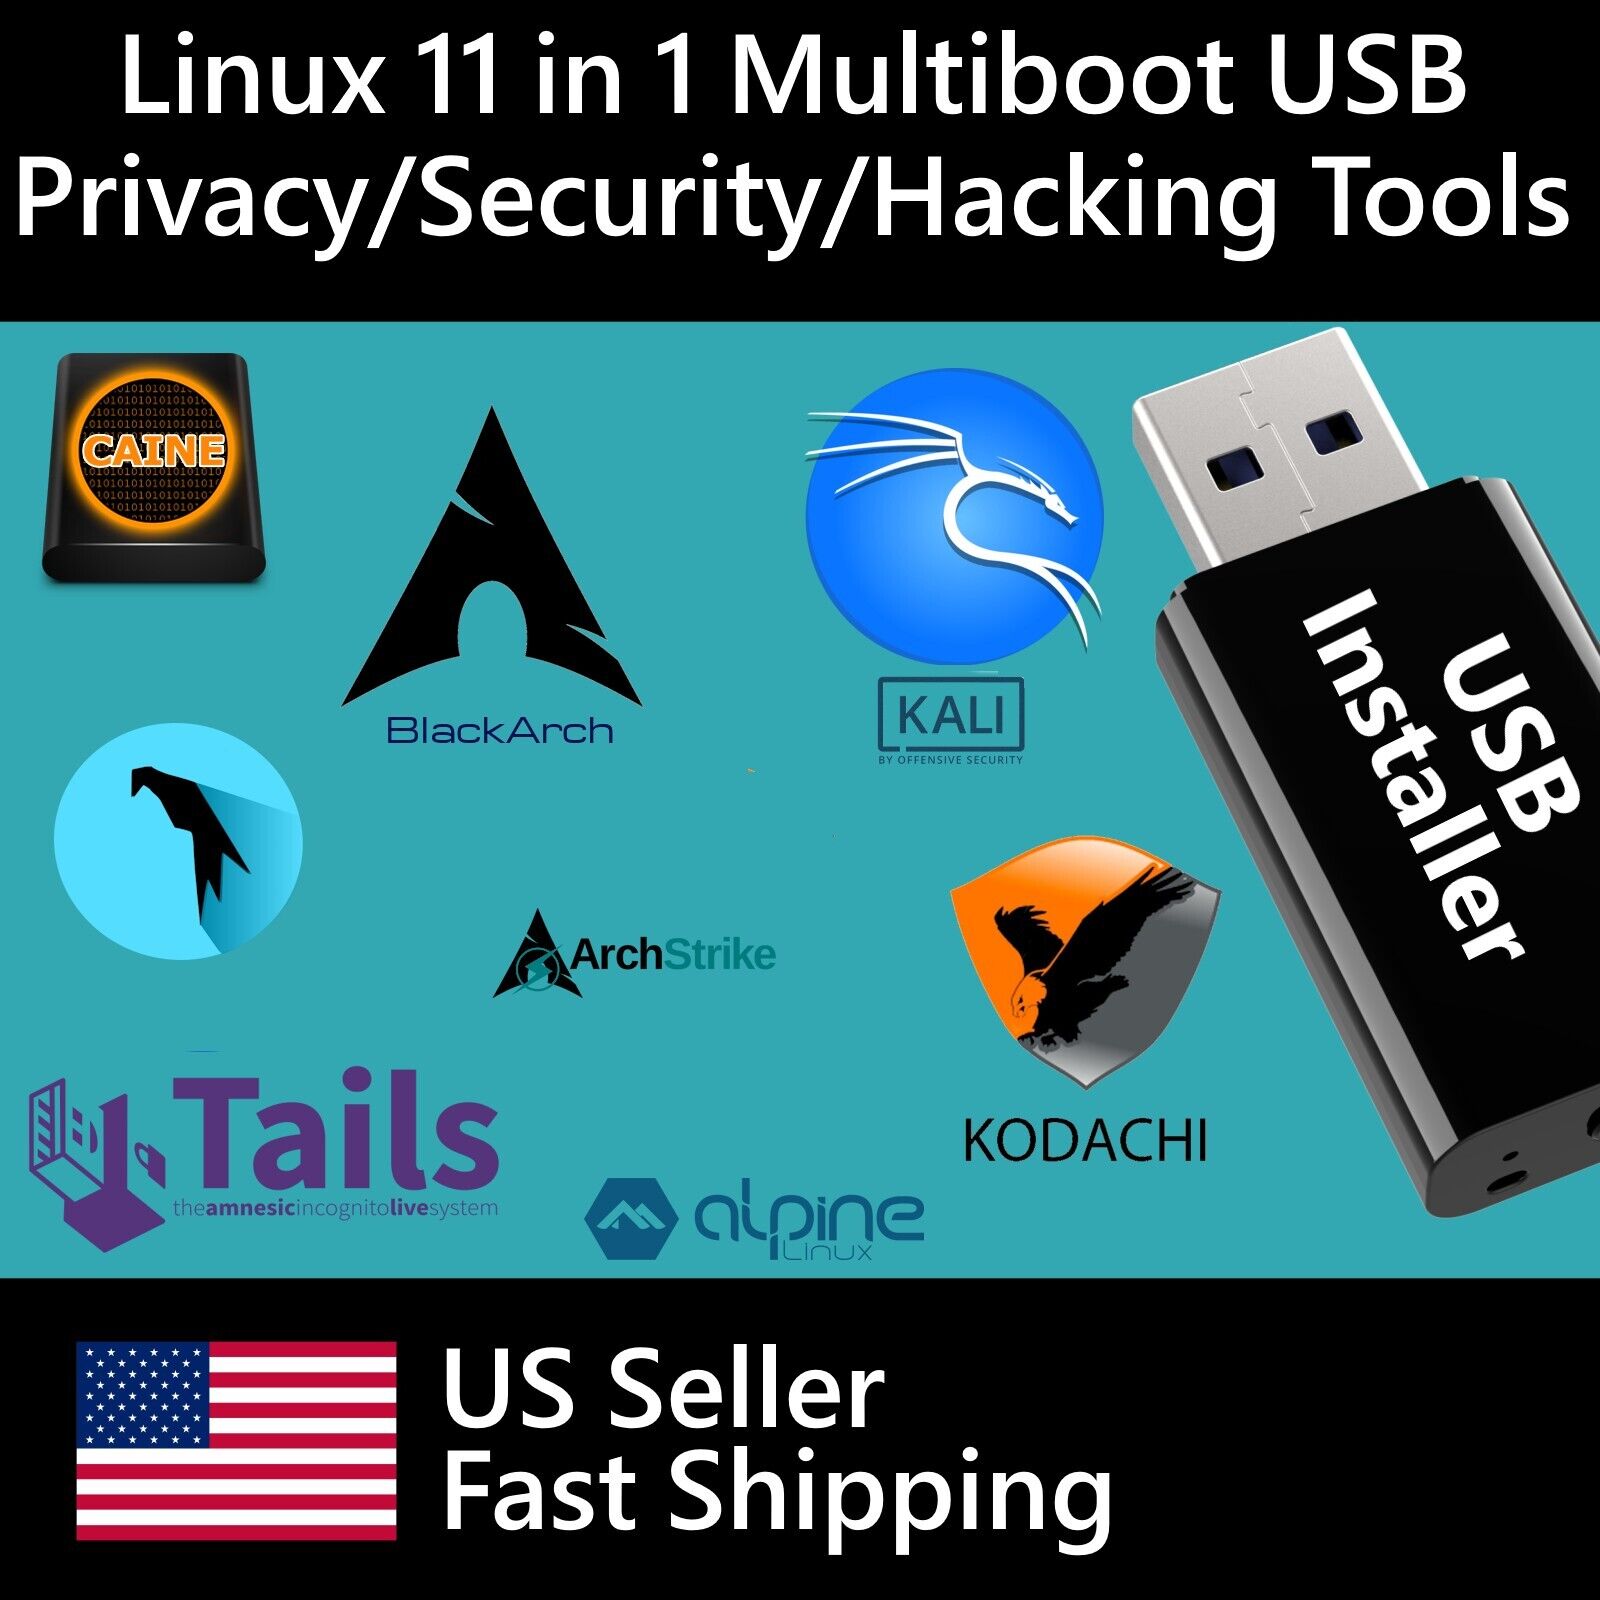 Linux 11 in 1 Windows Alternative Bootable Security Privacy Kali Tails Caine